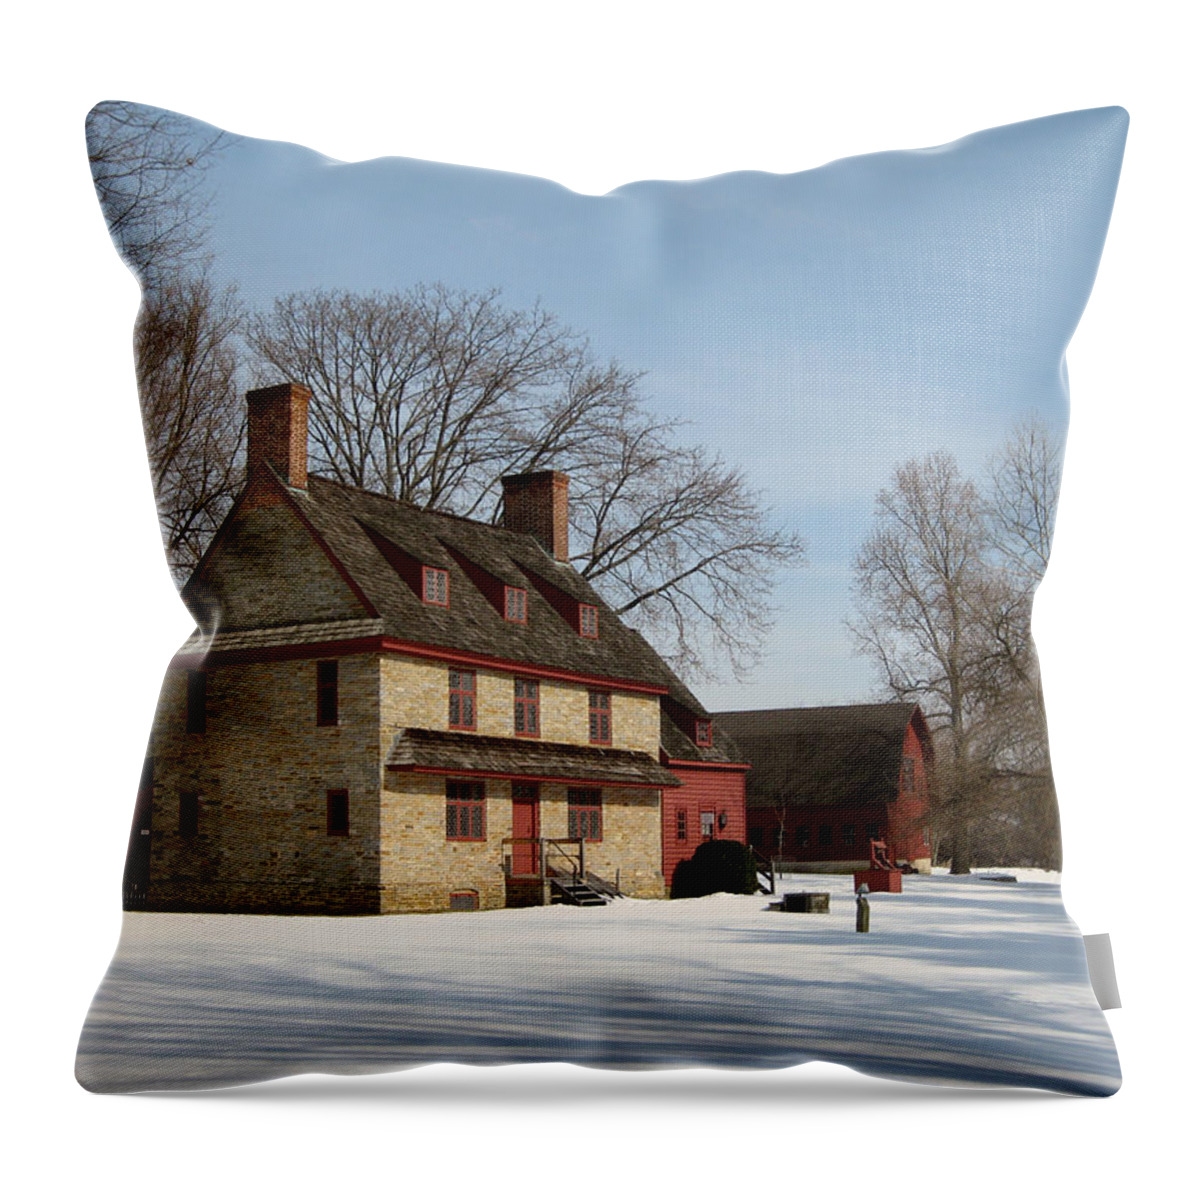 William Throw Pillow featuring the photograph William Brinton House, 1704 by Gordon Beck